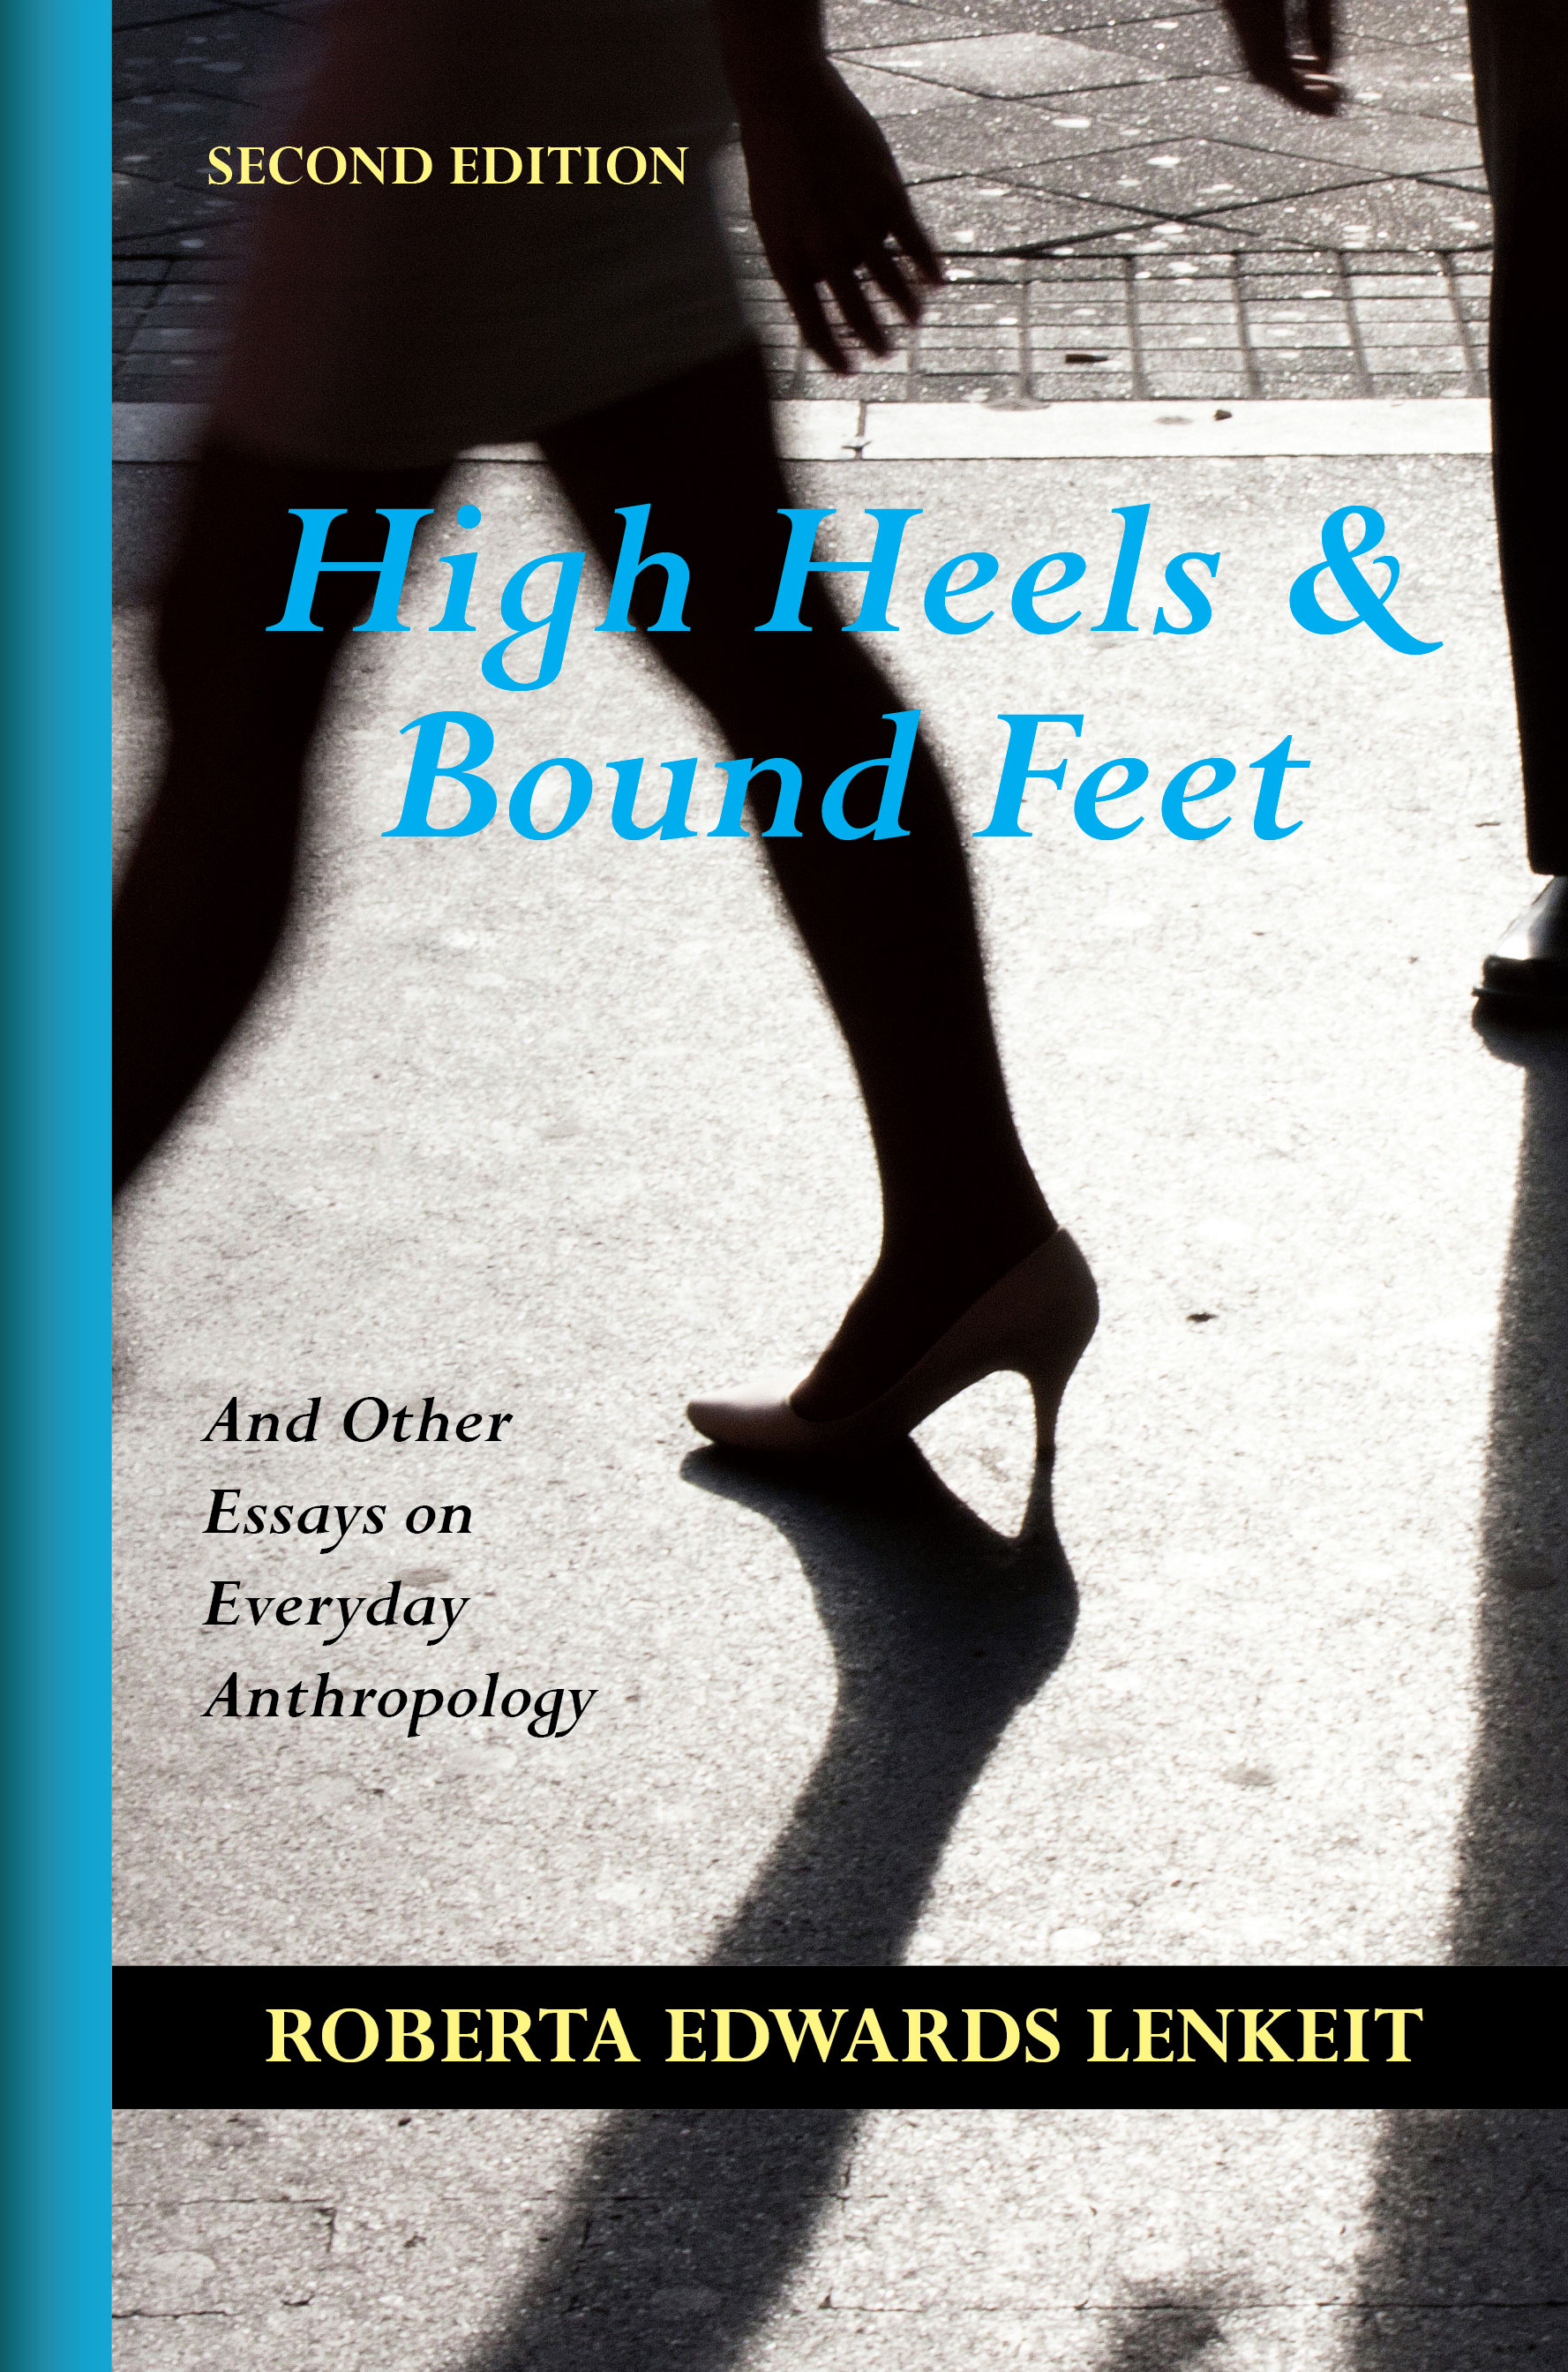 High Heels and Bound Feet: And Other Essays on Everyday Anthropology by Roberta Edwards Lenkeit